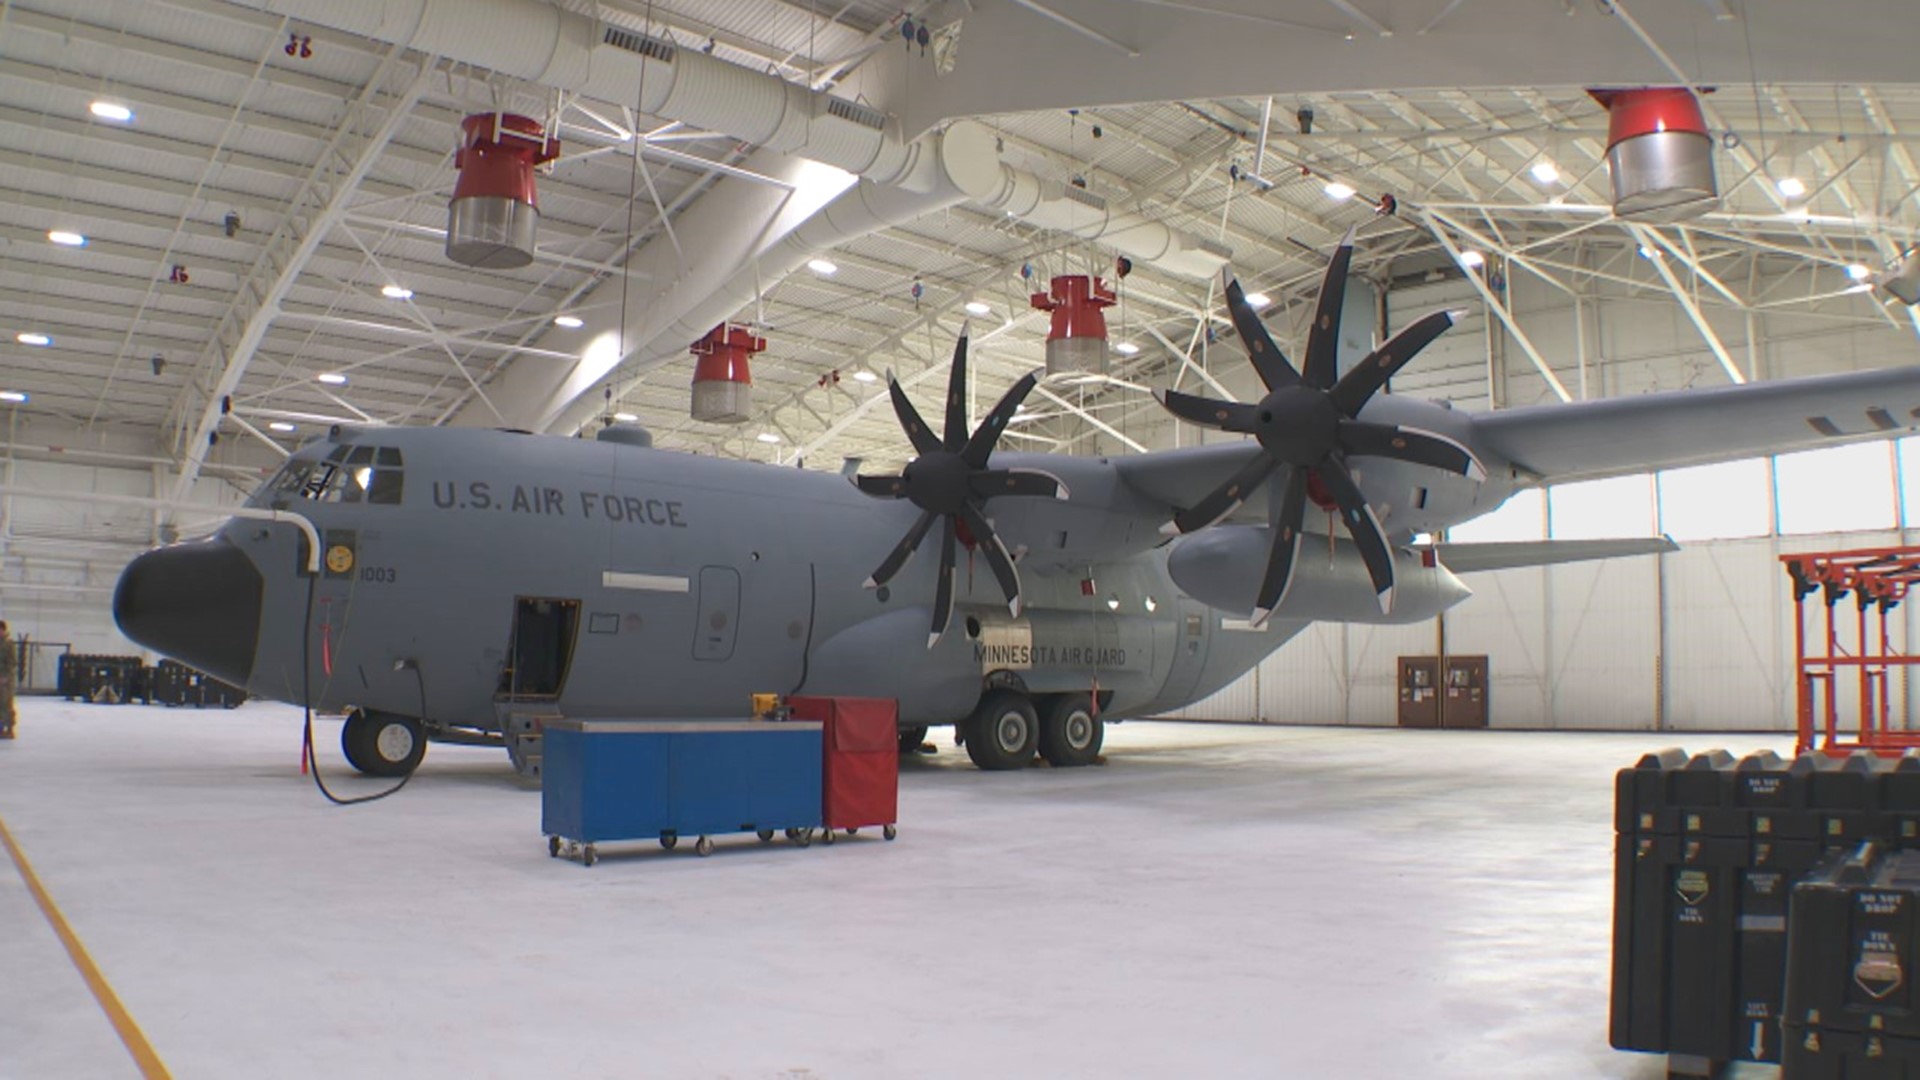 133rd Airlift Wing will receive eight C-130J "Super Hercules" aircraft to replace current fleet of C-130H planes, thanks to bipartisan teamwork in Washington.